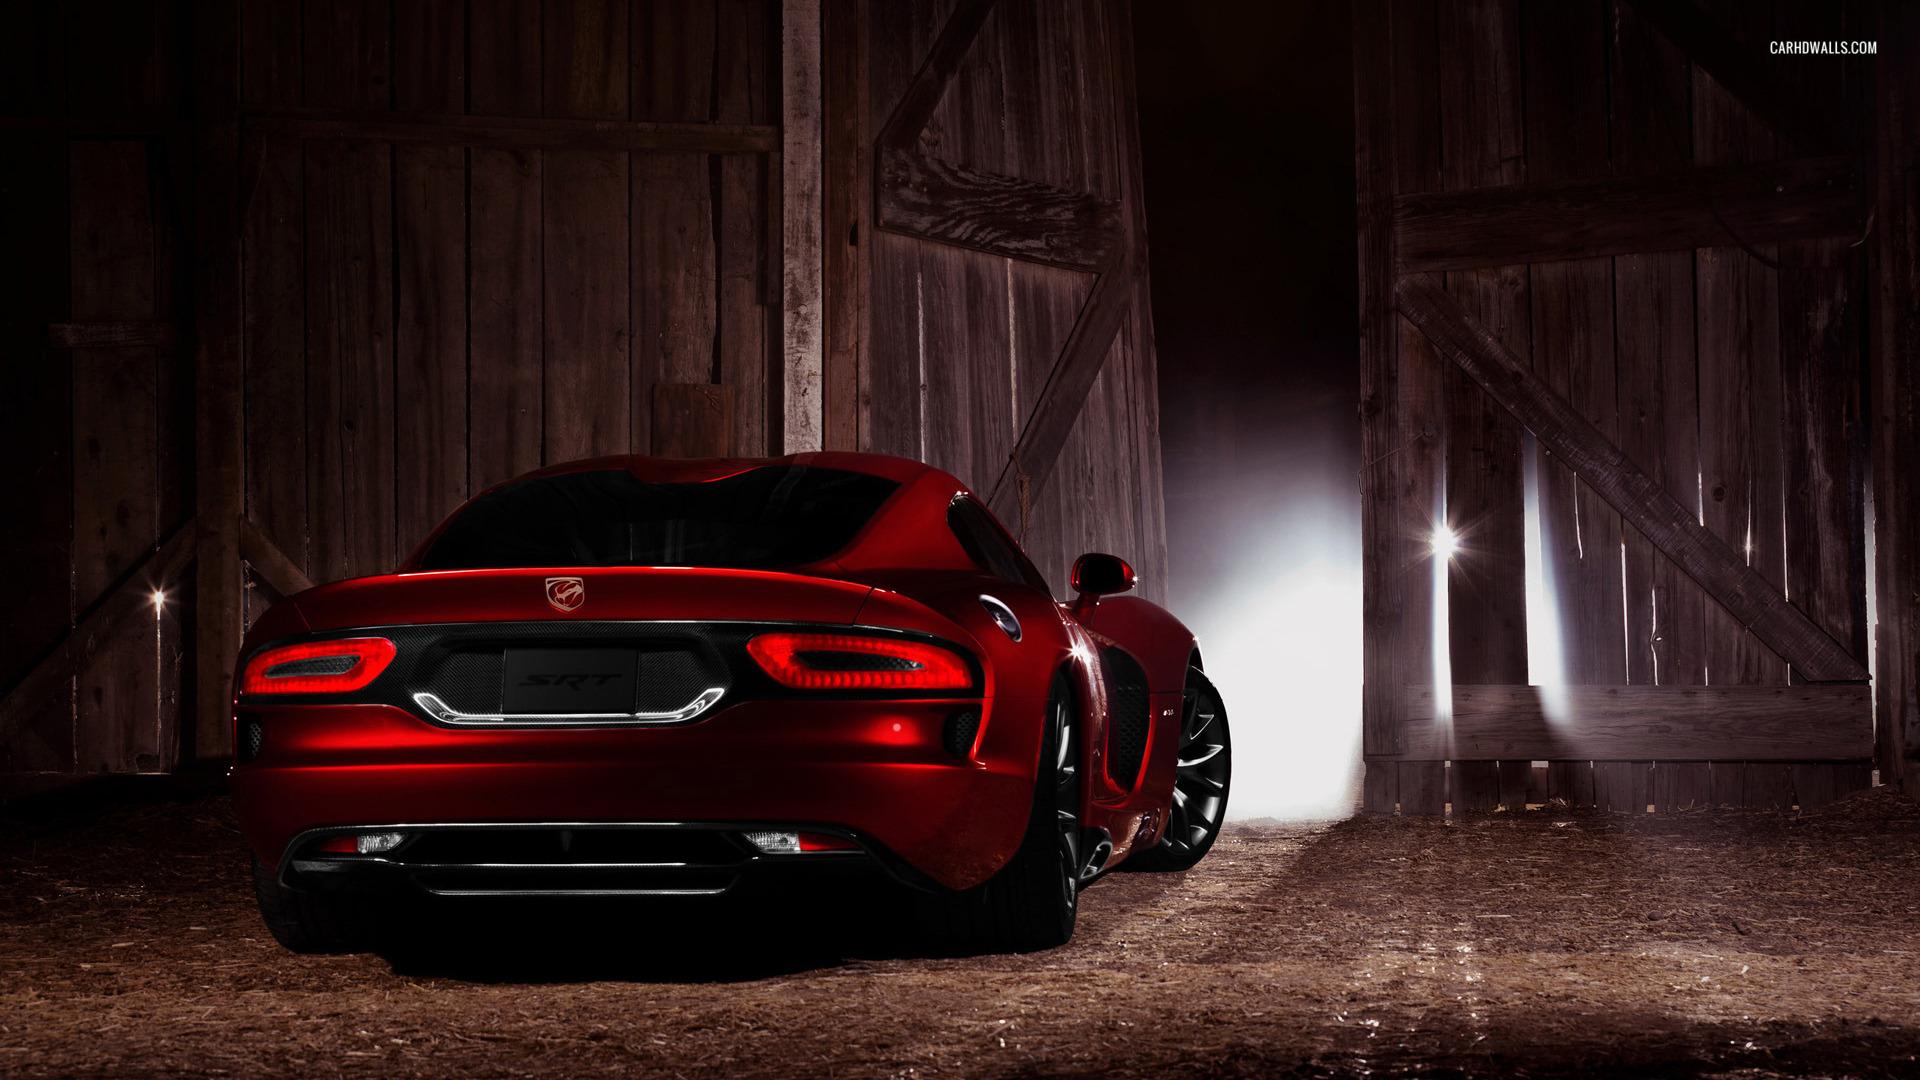 Dodge Viper Wallpapers 2K Photos, Wallpapers and other Wallpaper